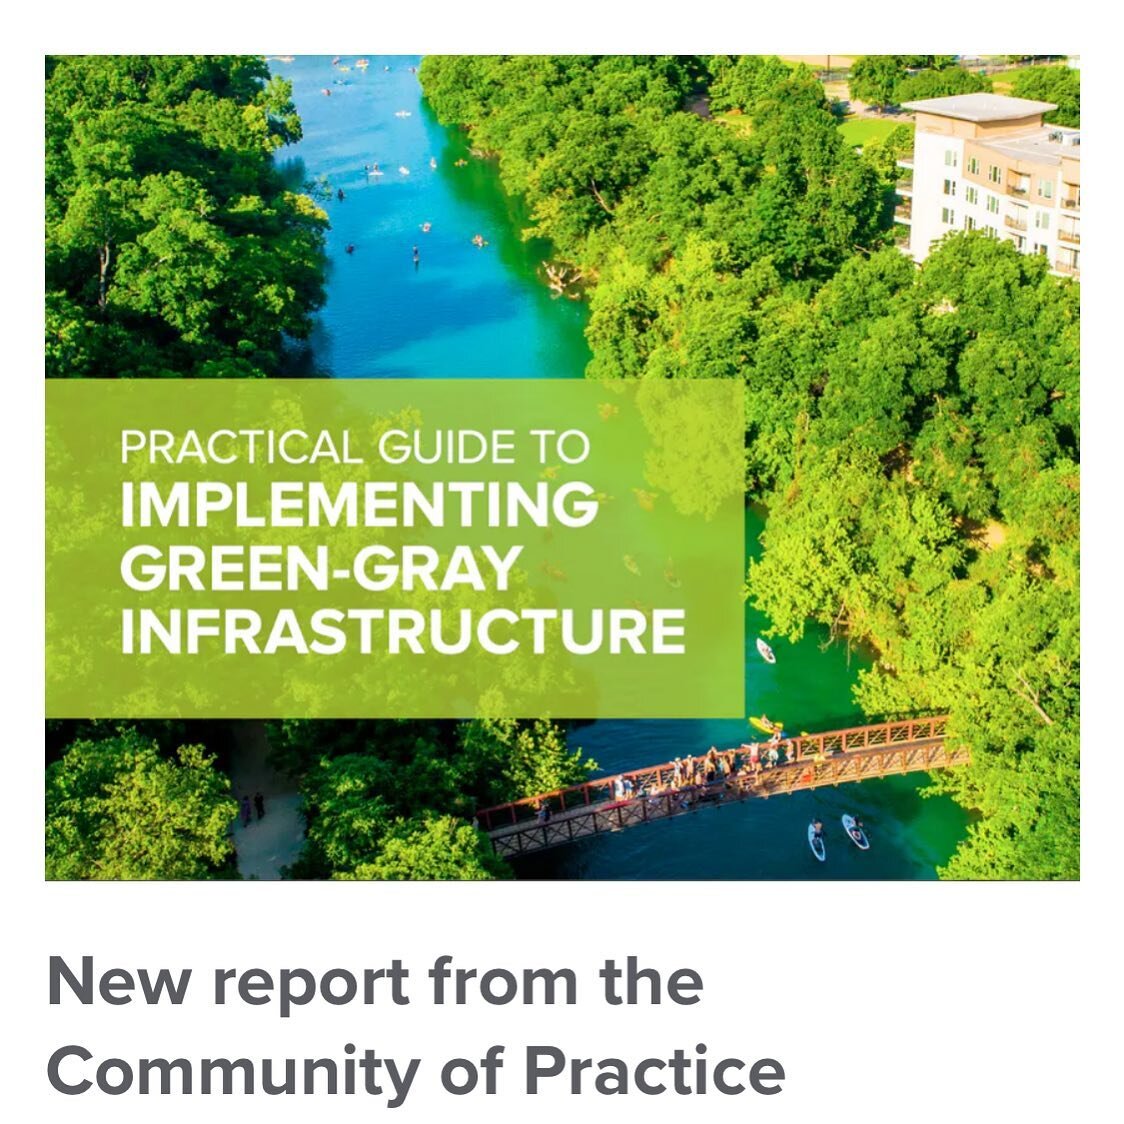 Excited to announce this first of its kind document - a tool to identify, fund, plan, design, construct, and monitor green-gray infrastructure projects, to increase the resilience of vulnerable cities, communities, and assets around the world.
 
The 